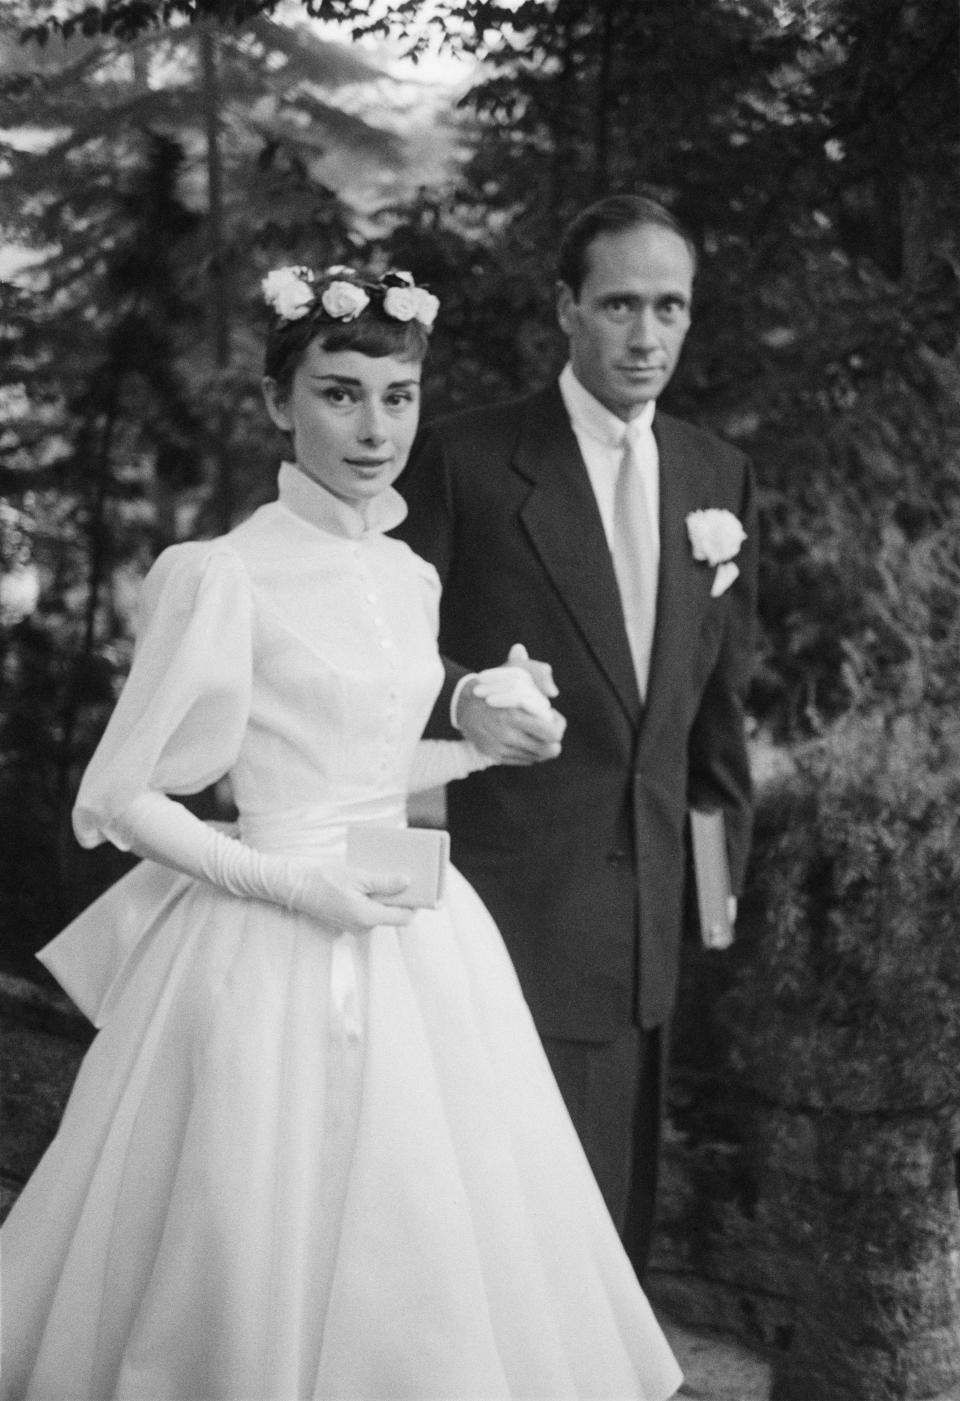 Audrey Hepburn, dressed in a white wedding dress with a crown of flowers, holds hands with her husband, Mel Ferrer.